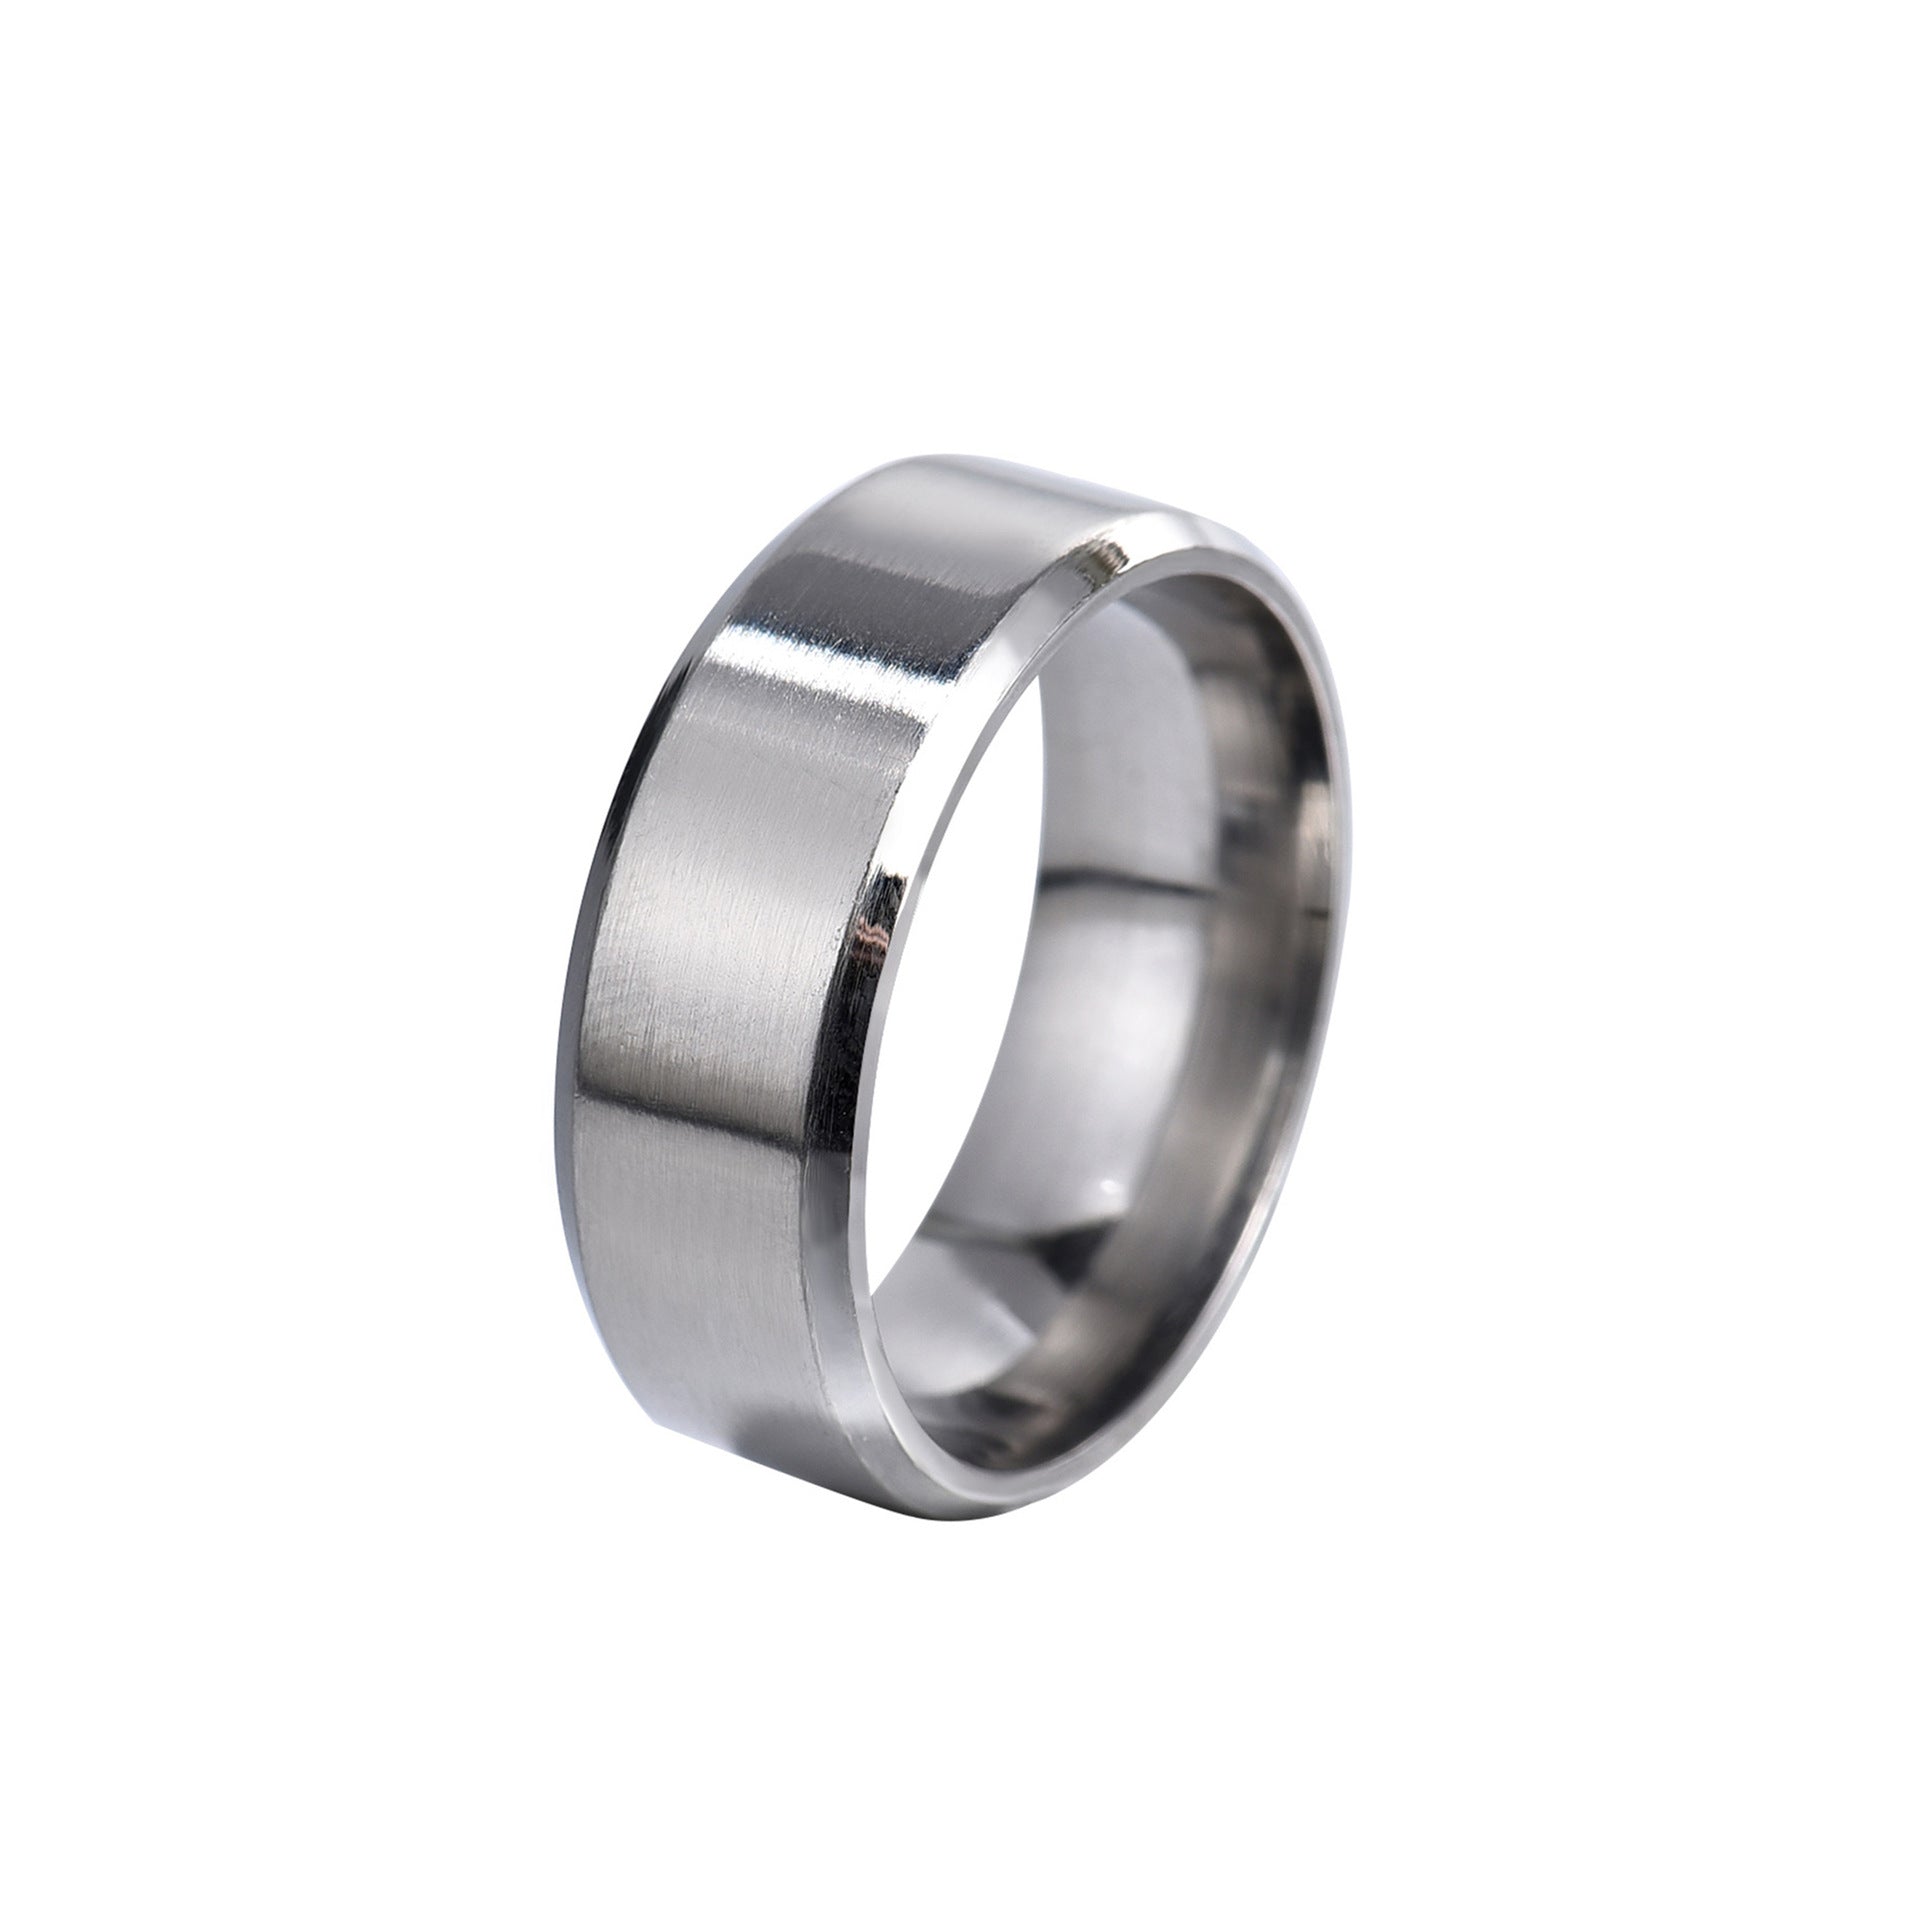 Silver Colored 316L Quality Steel Ring Wedding Ring (27 Size)